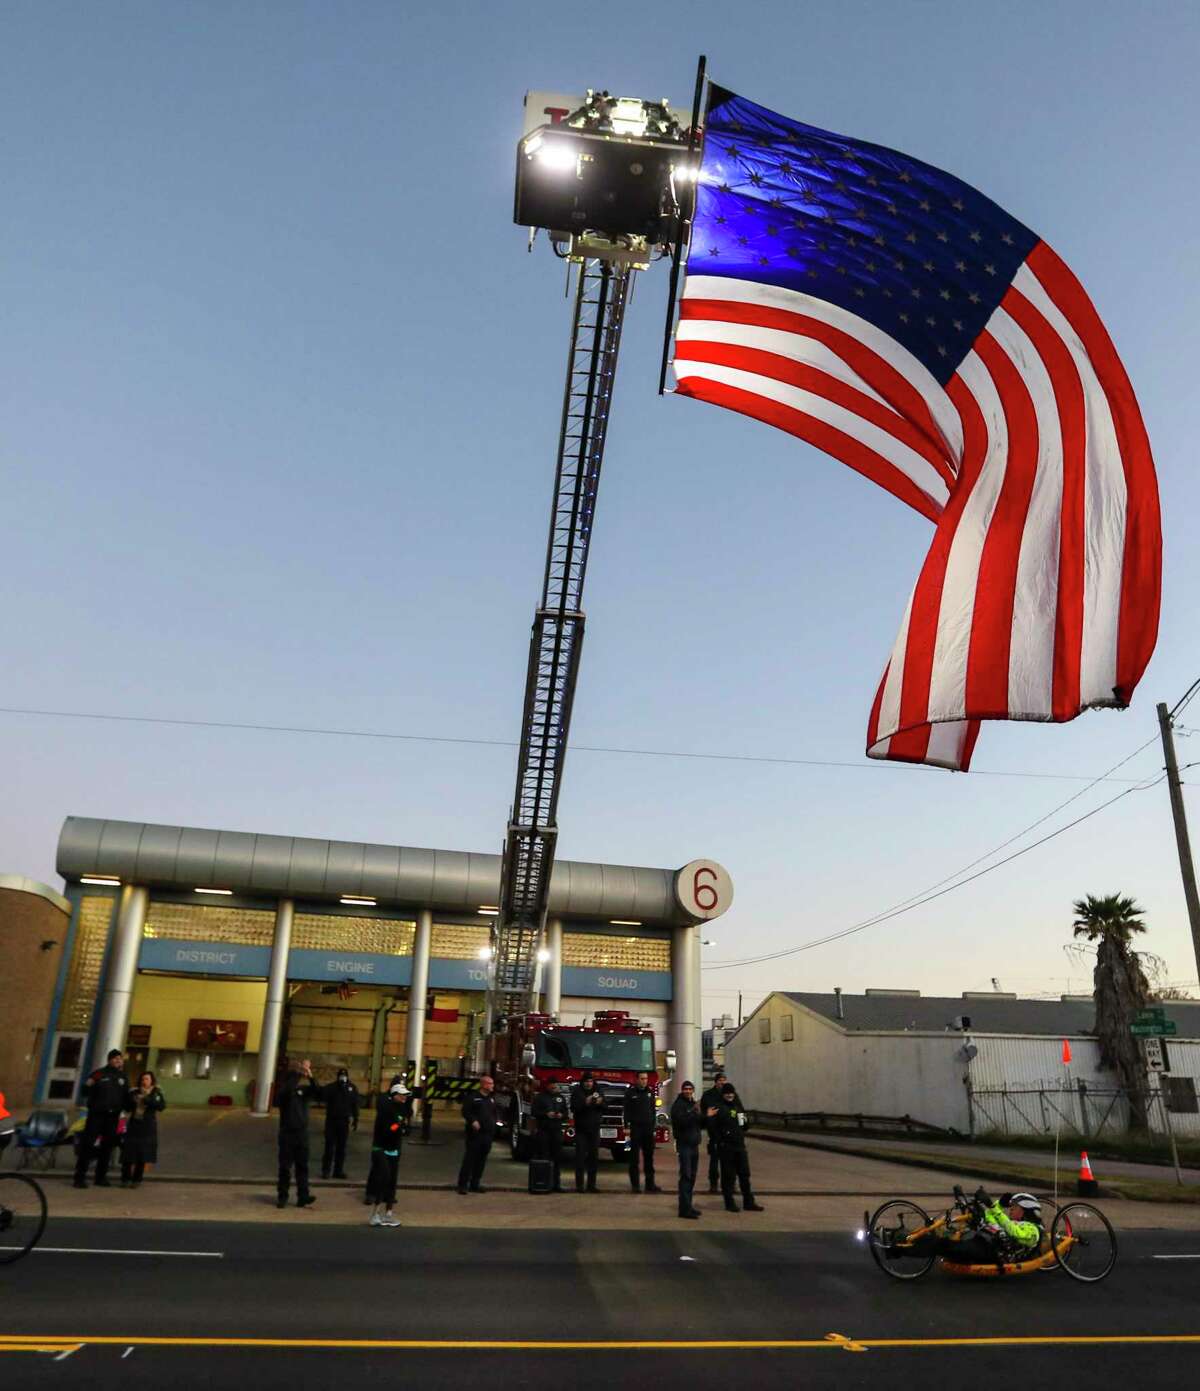 An American flag flies off of a ladder truck at Houston Fire station 6 as the wheelchair participants pass by during the Chevron Houston Marathon along Washington Avenue near Waugh, Sunday, Jan. 16, 2022 in Houston. Hours later, a Harris County deputy sheriff suffering from a gunshot wound was transported there for medical assistance but died at a local hospital.